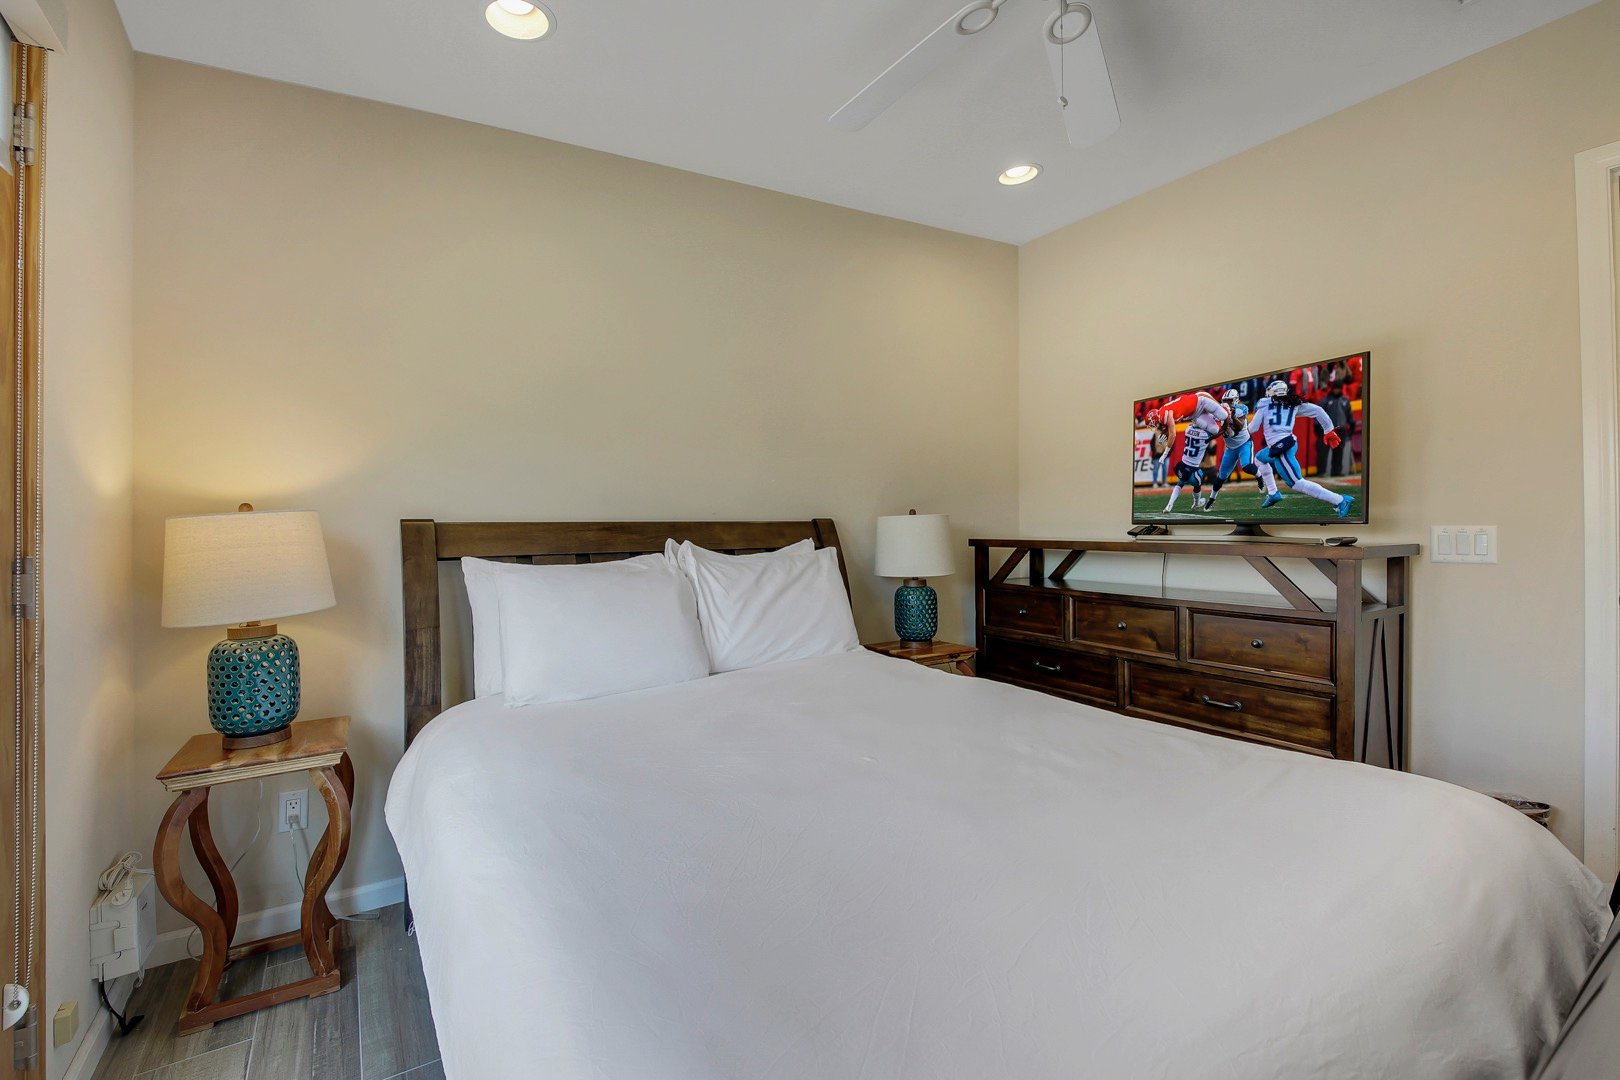 Bedroom 4 has a Queen-sized bed, Smart TV, with exterior doors to the horseshoe pit.